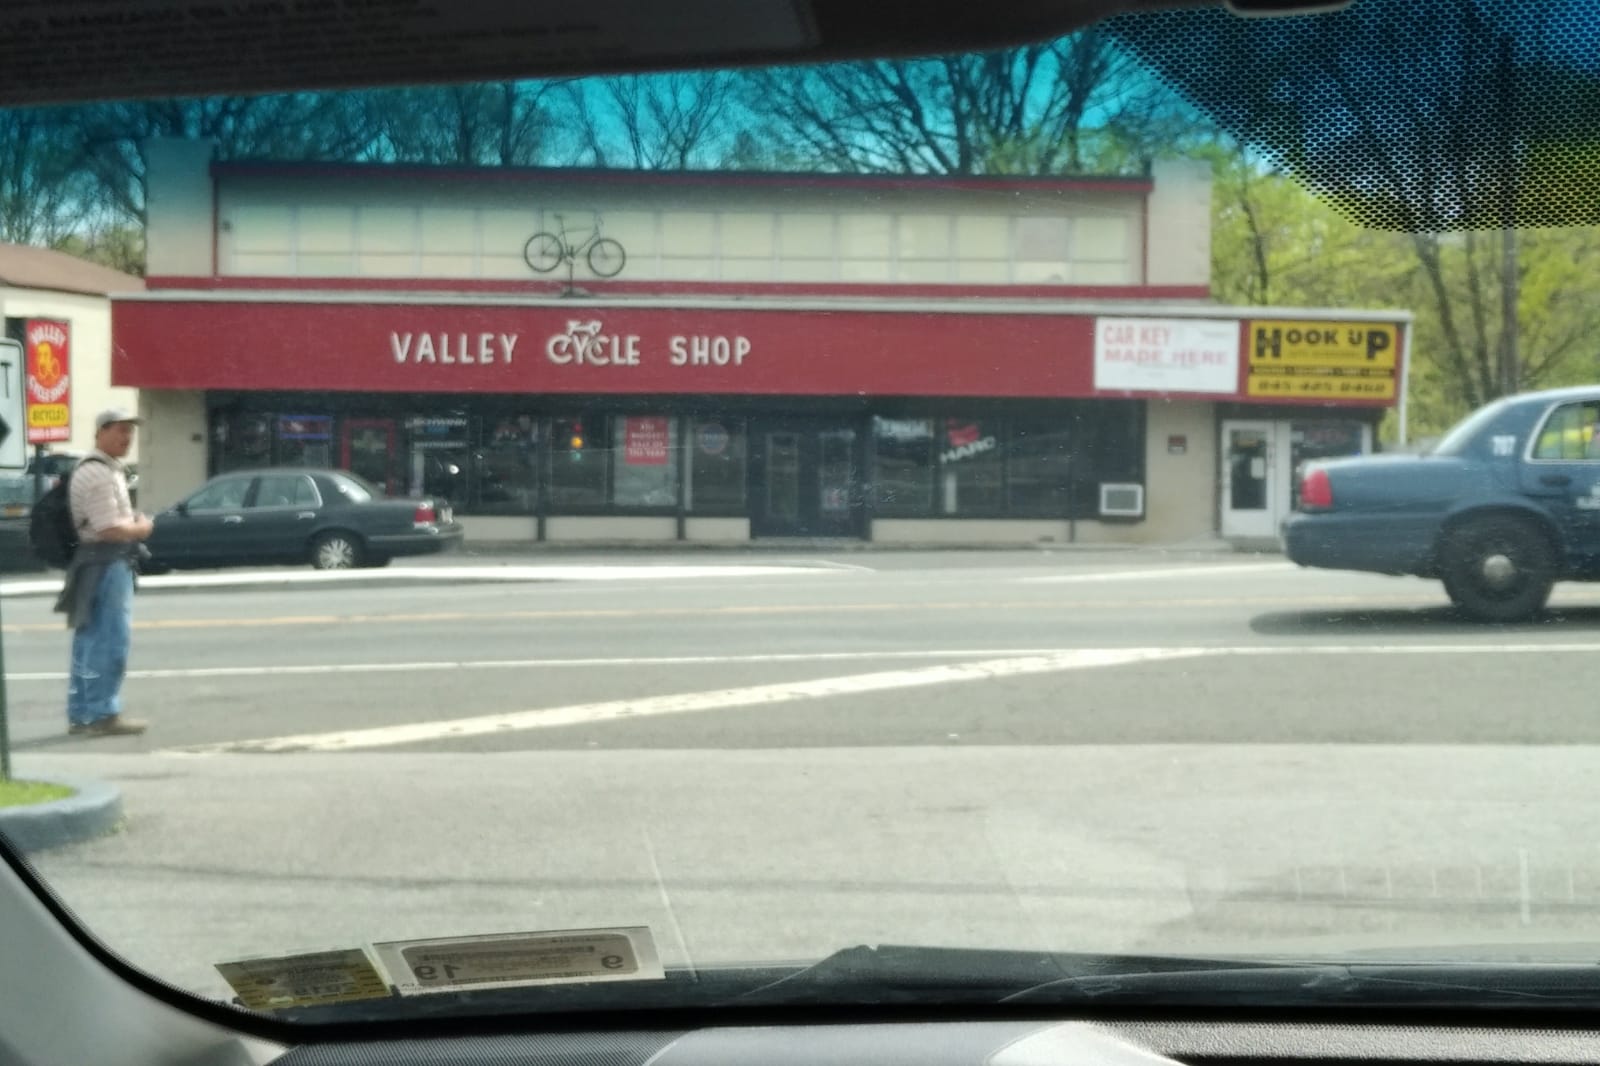 Valley Cycle Shop